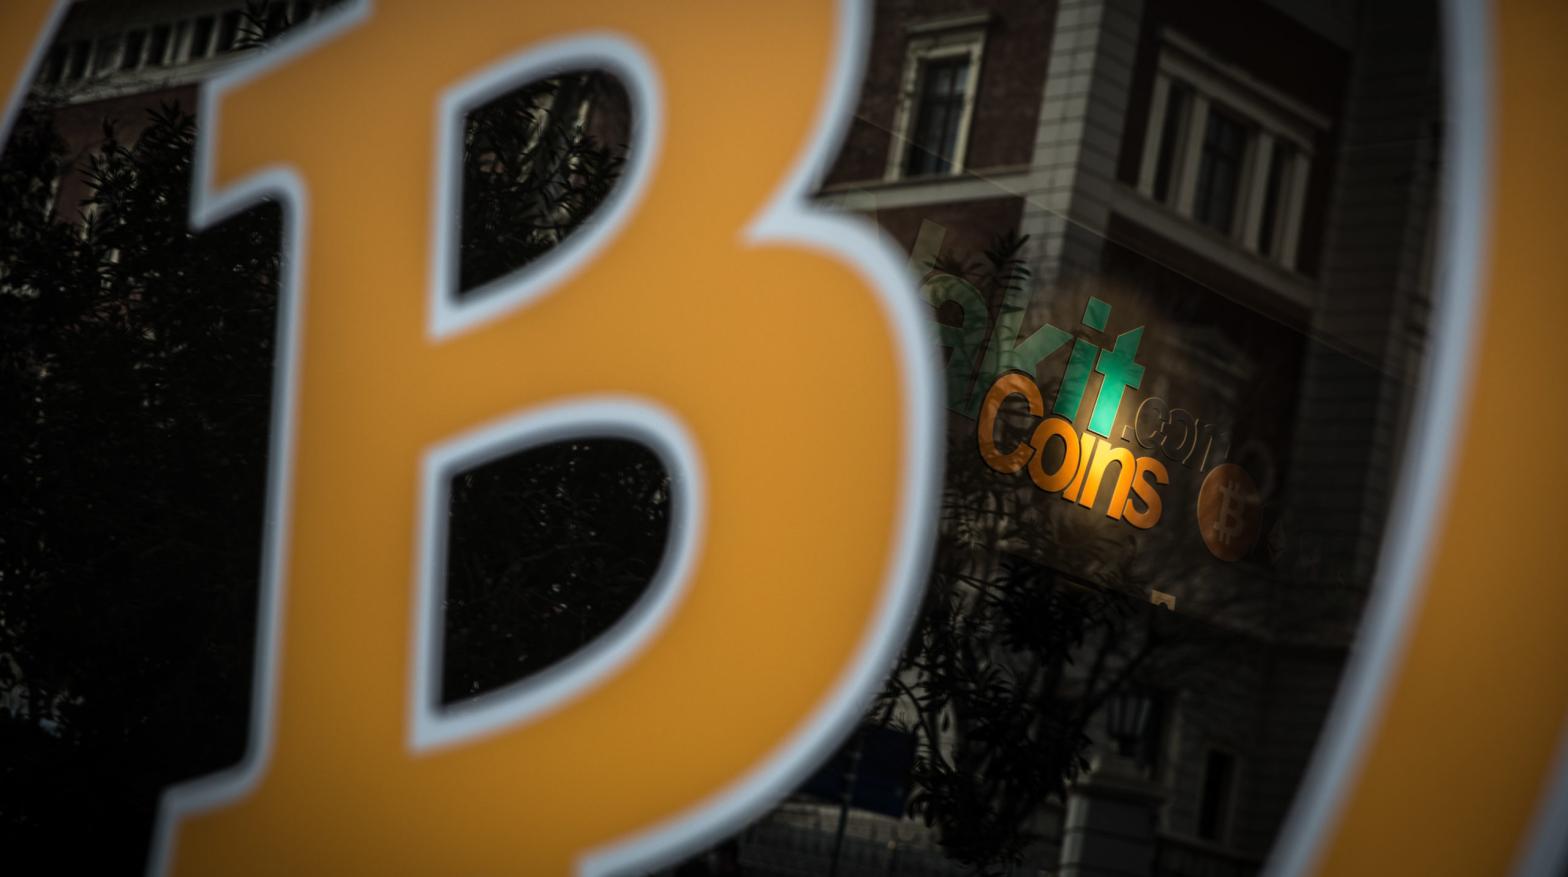 A Bitcoin sign is seen at the entrance of a cryptocurrency exchange office on April 16, 2021 in Istanbul, Turkey. (Photo: Chris McGrath, Getty Images)